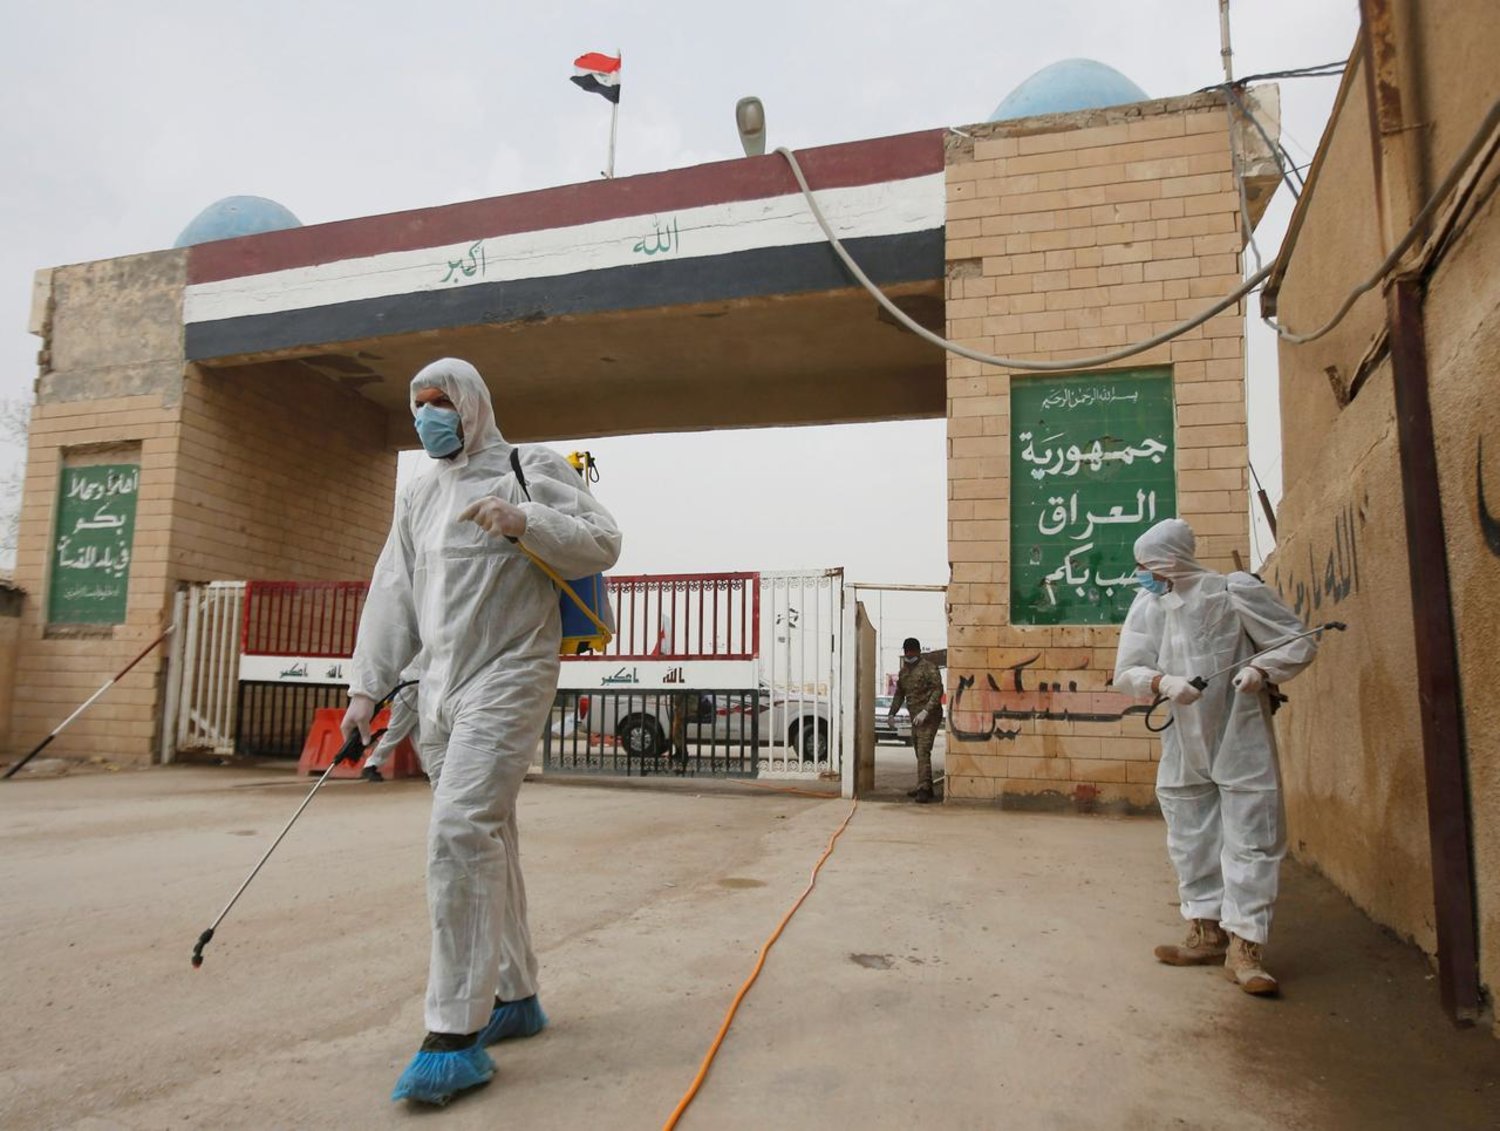 Workers in protective suits spray disinfectants near the gate of Shalamcha Border Crossing, after Iraq shut a border crossing to travelers between Iraq and Iran (file photo: Reuters)